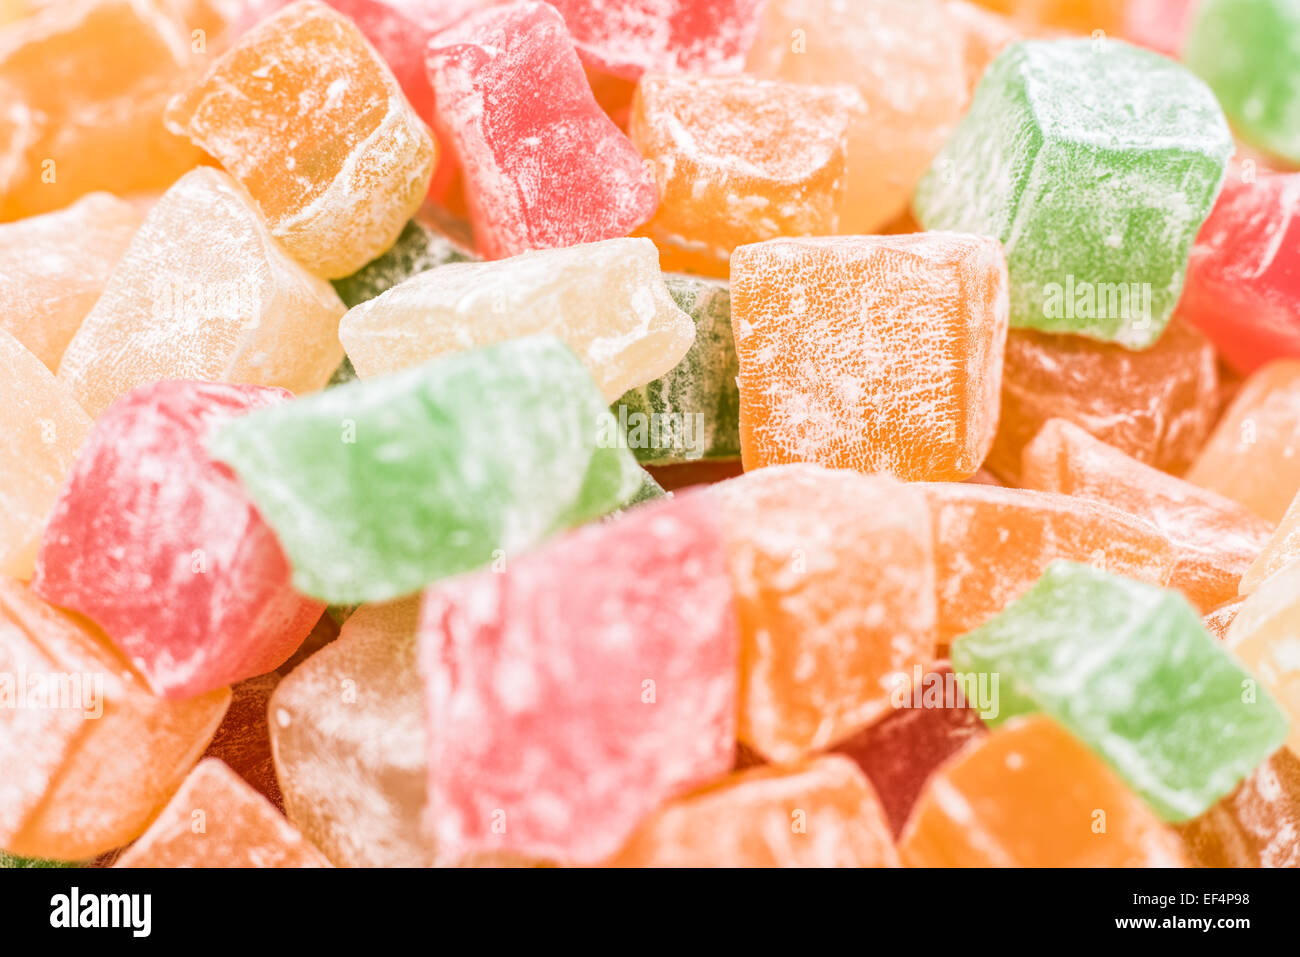 Turkish Delight Sweets With Powdered Sugar Close Up Stock Photo